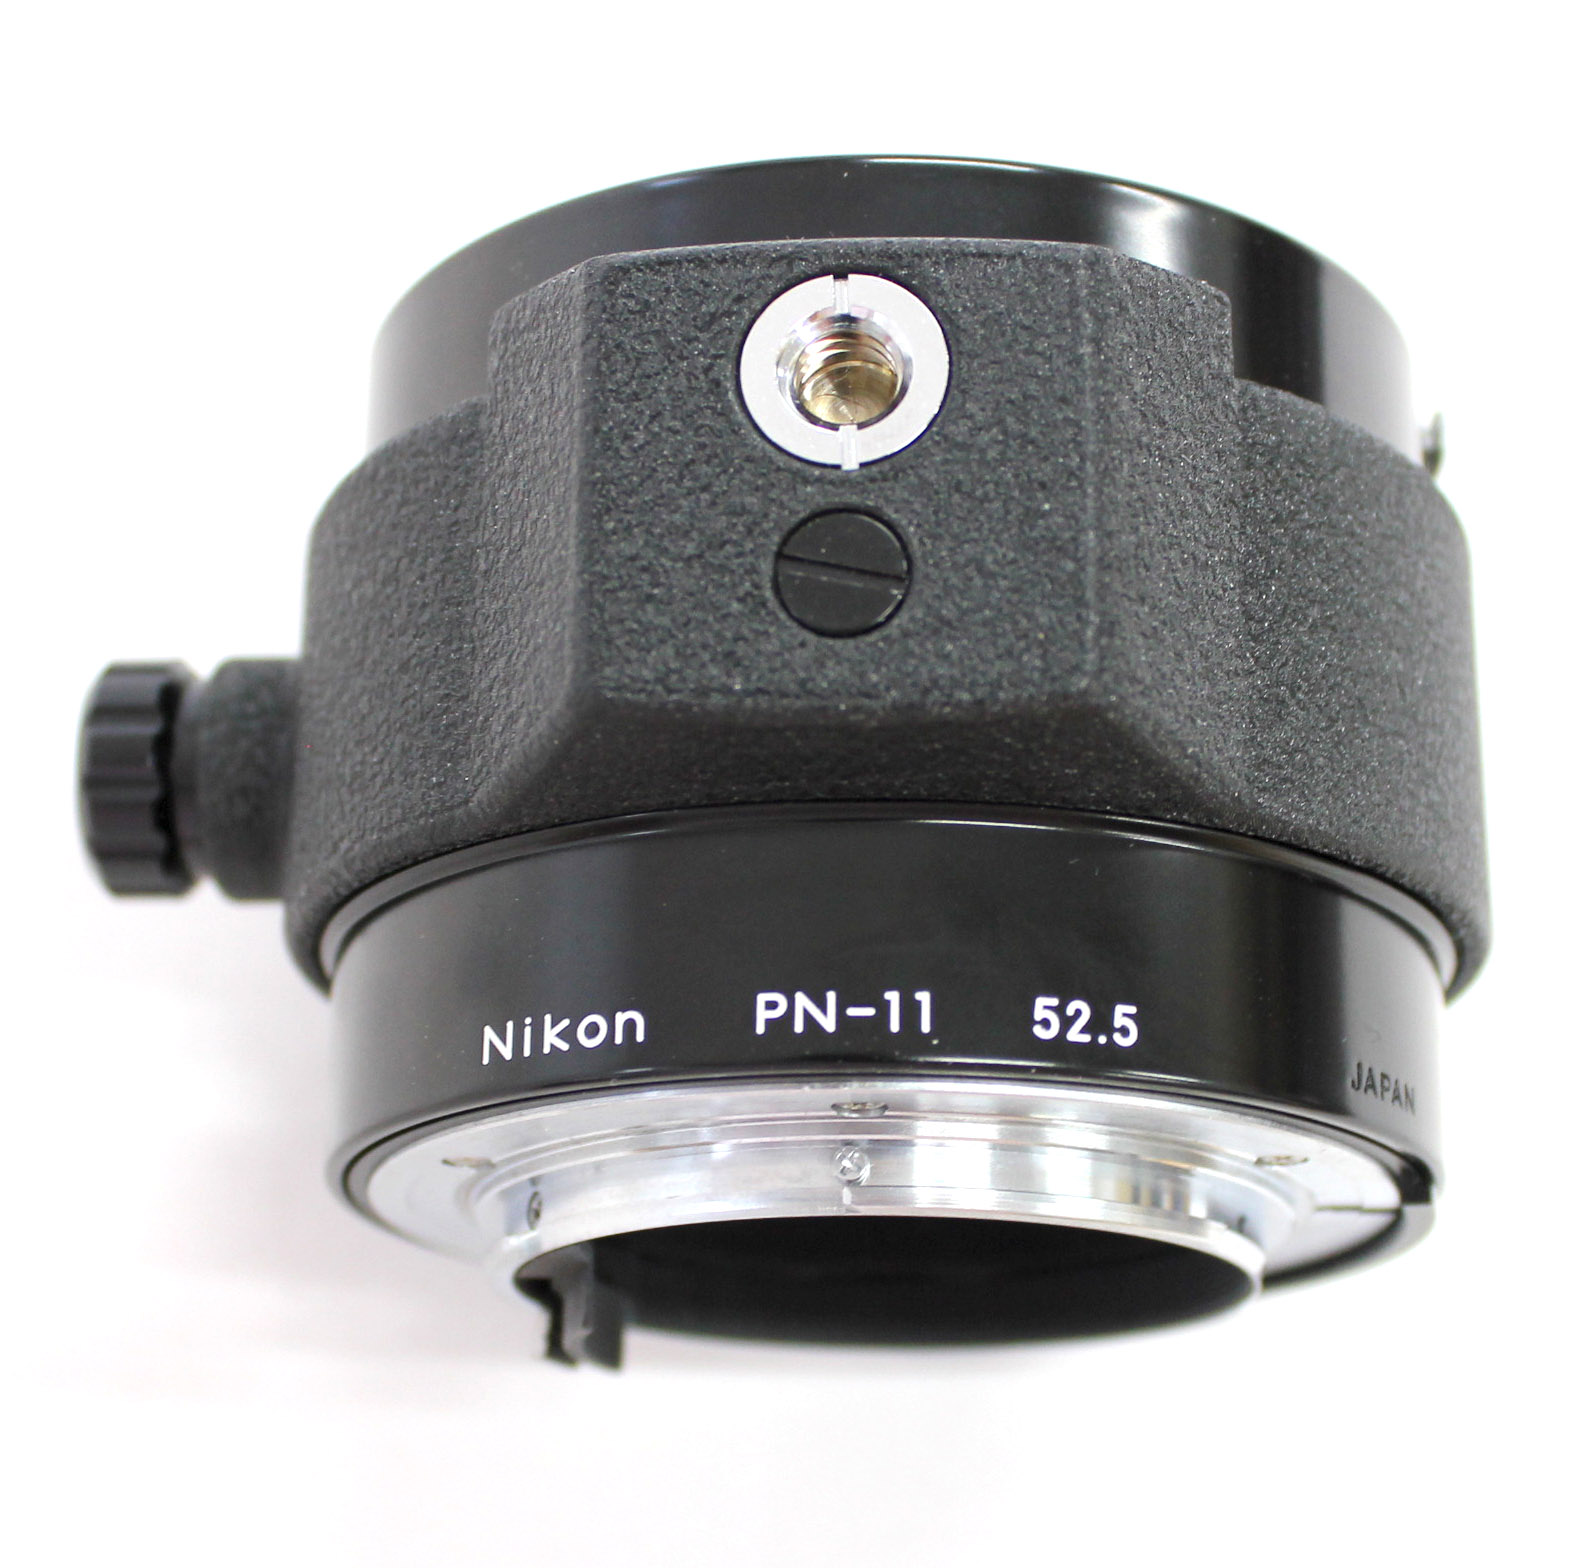  Nikon PN-11 52.5 Extension Ring Tube for AI-S Micro Nikkor 105mm F/2.8 Lens from Japan Photo 5